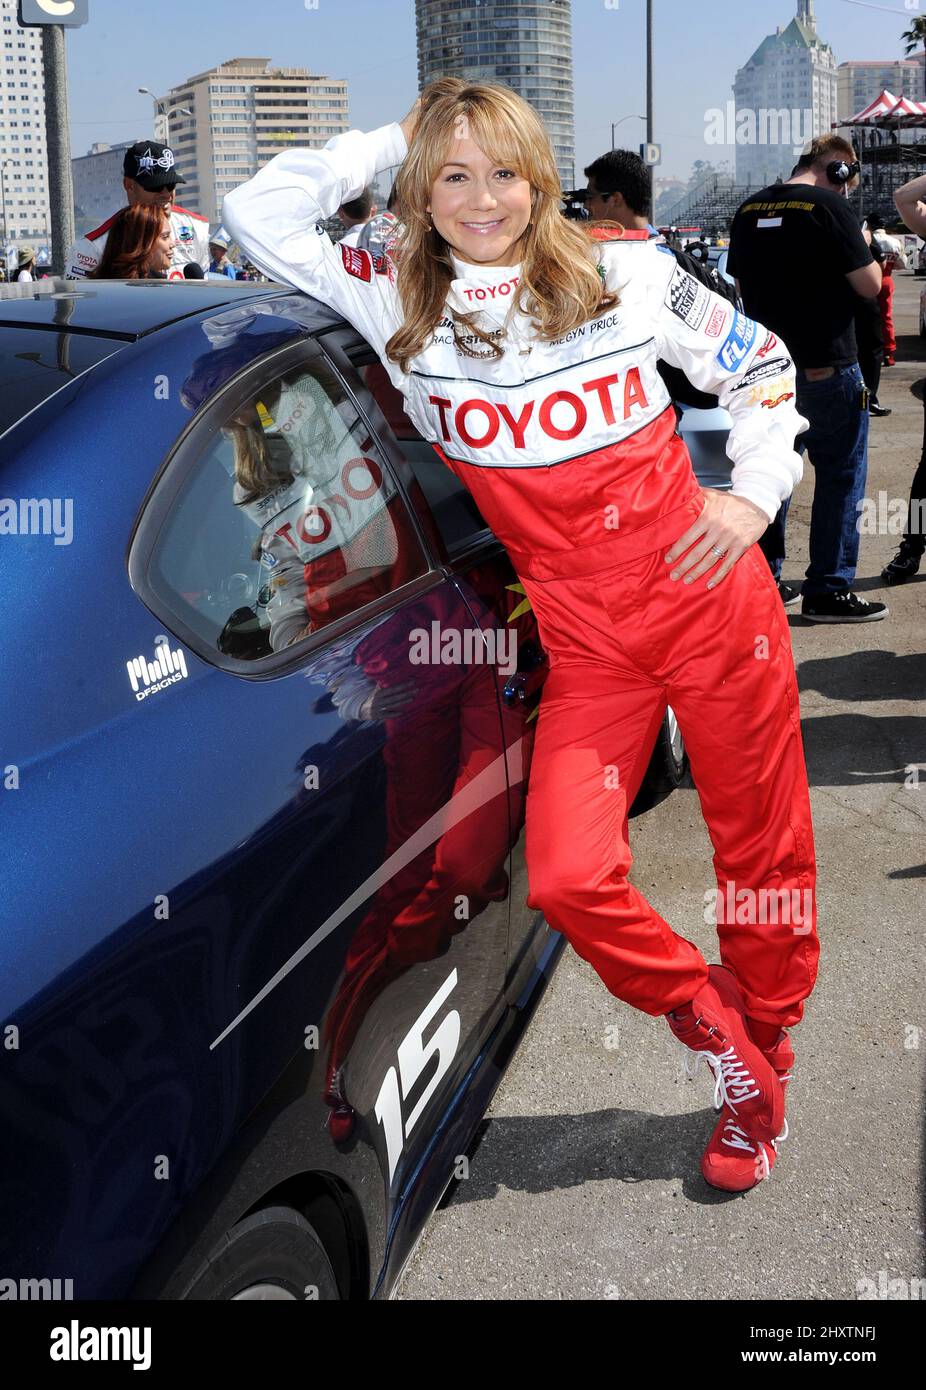 Megyn Price participates in the 35th Annual Toyota Pro/Celebrity Race's Media Day held at The Streets of Long Beach/Shoreline Drive on April 5, 2011 in Long Beach, California. Stock Photo